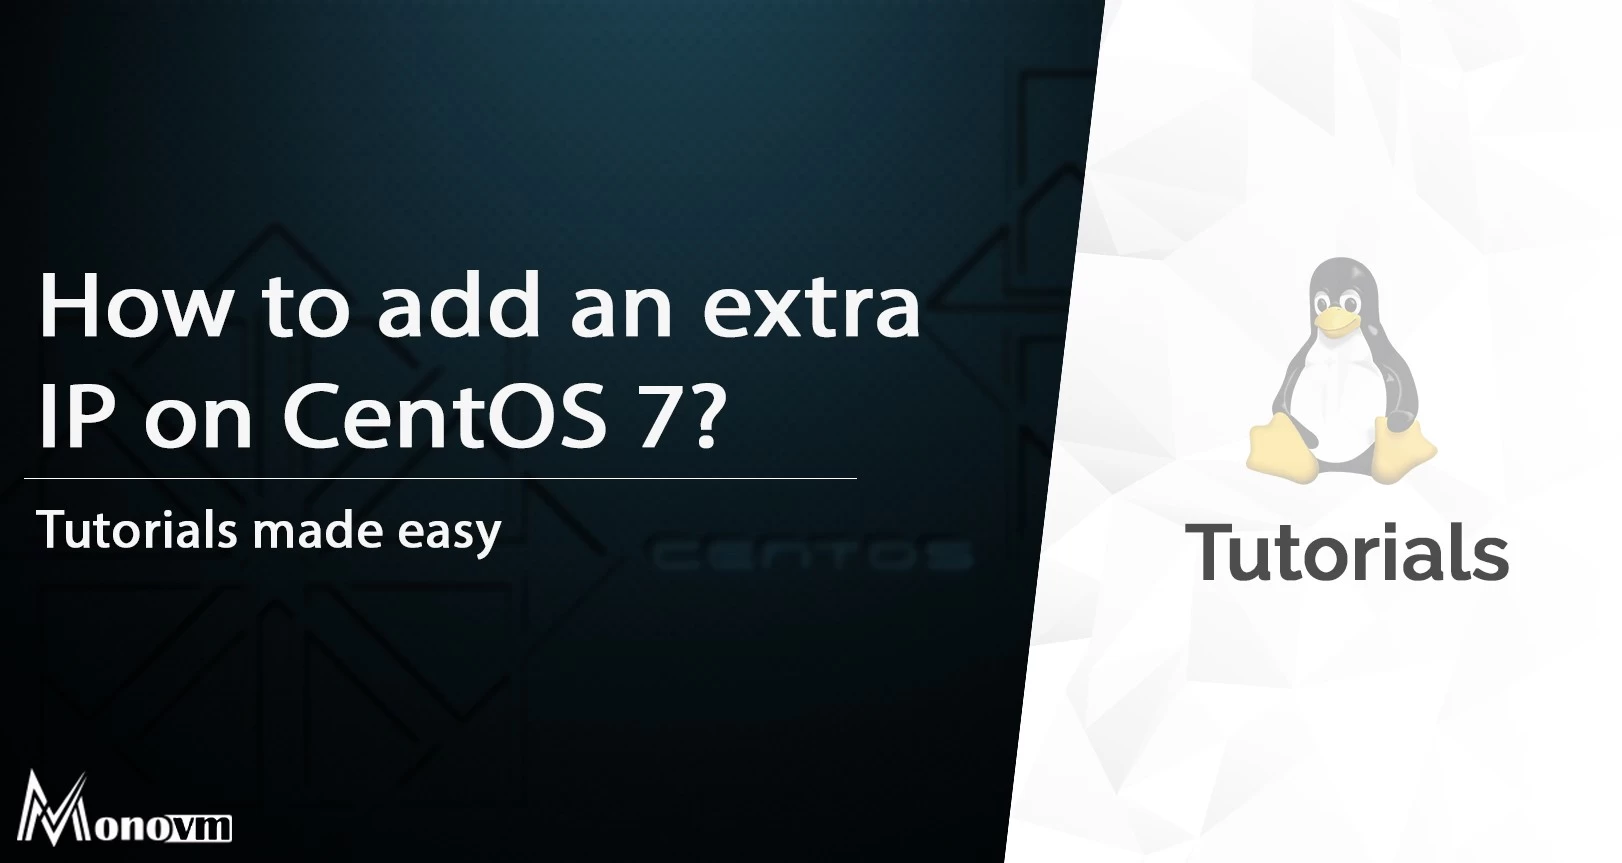 How to Add an Extra IP to CentOS 7?